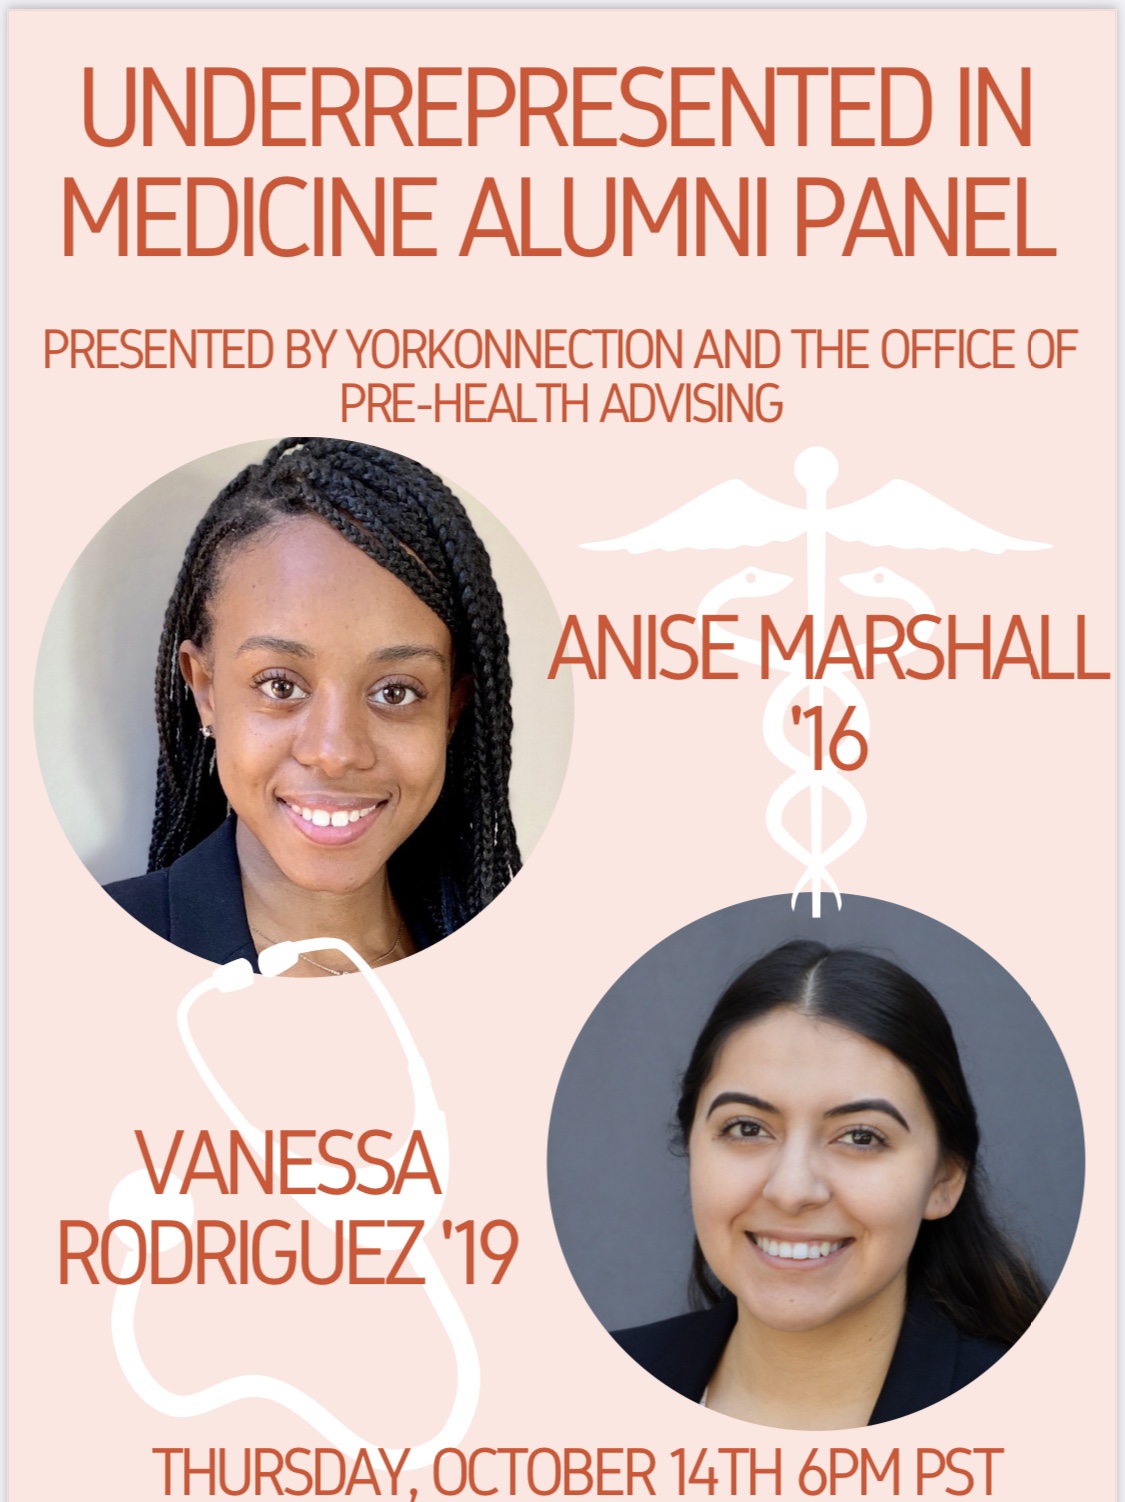 Underrepresented in Medicine Alumni Panel. Presented by the Office of PreHealth Advising and Yorkonnection. Anise Marshall '16. Vanessa Rodriguez '19. Thursday, October 14th at 6pm PST